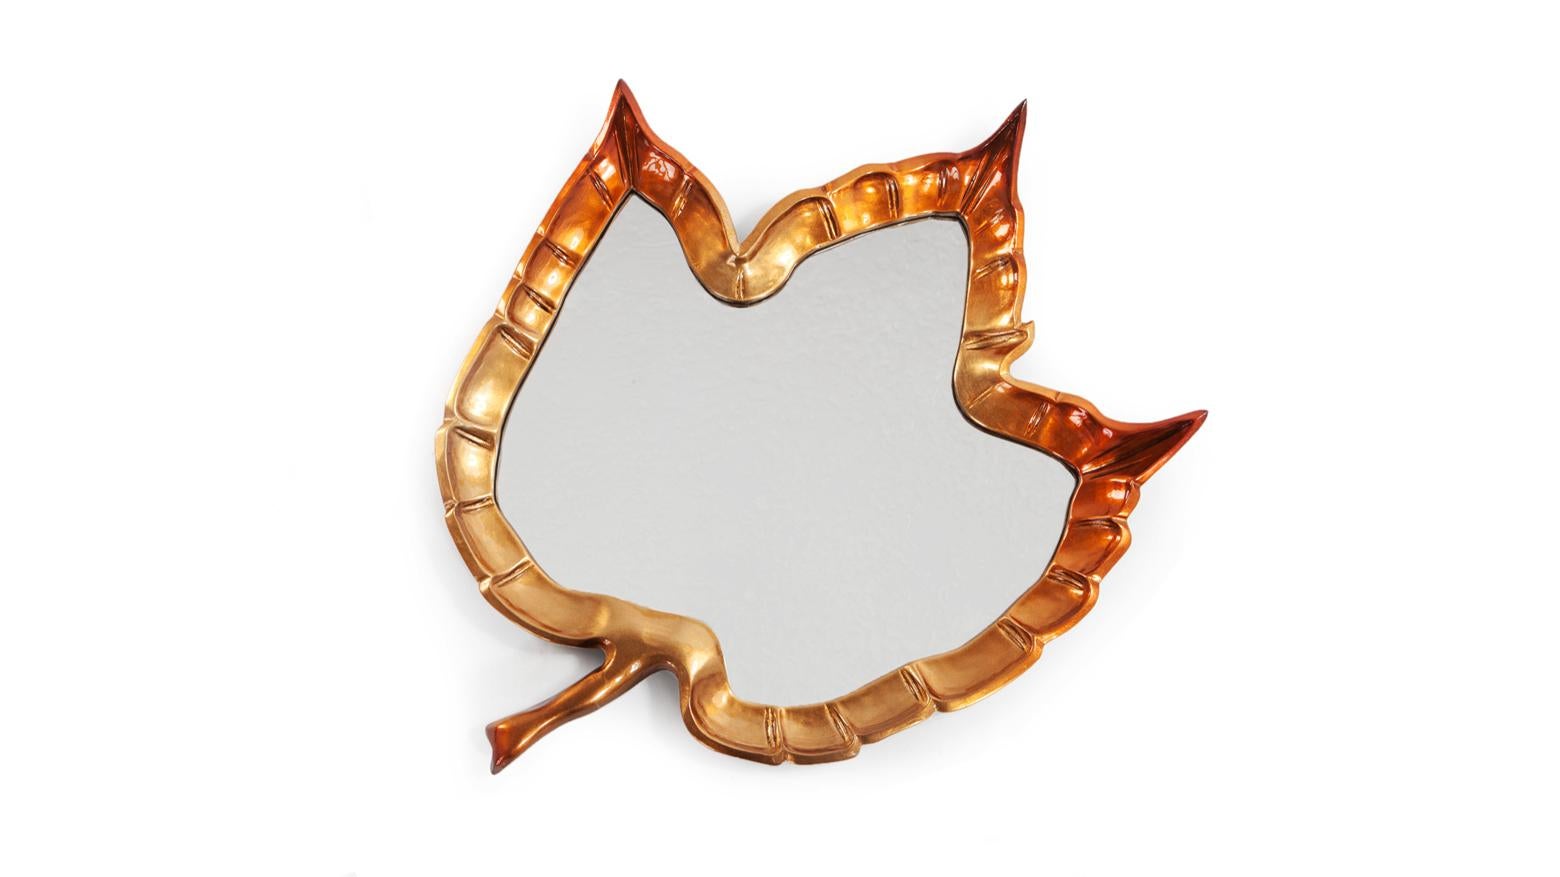 Other Set of 5 Fallen Leaves Mirrors by InsidherLand For Sale